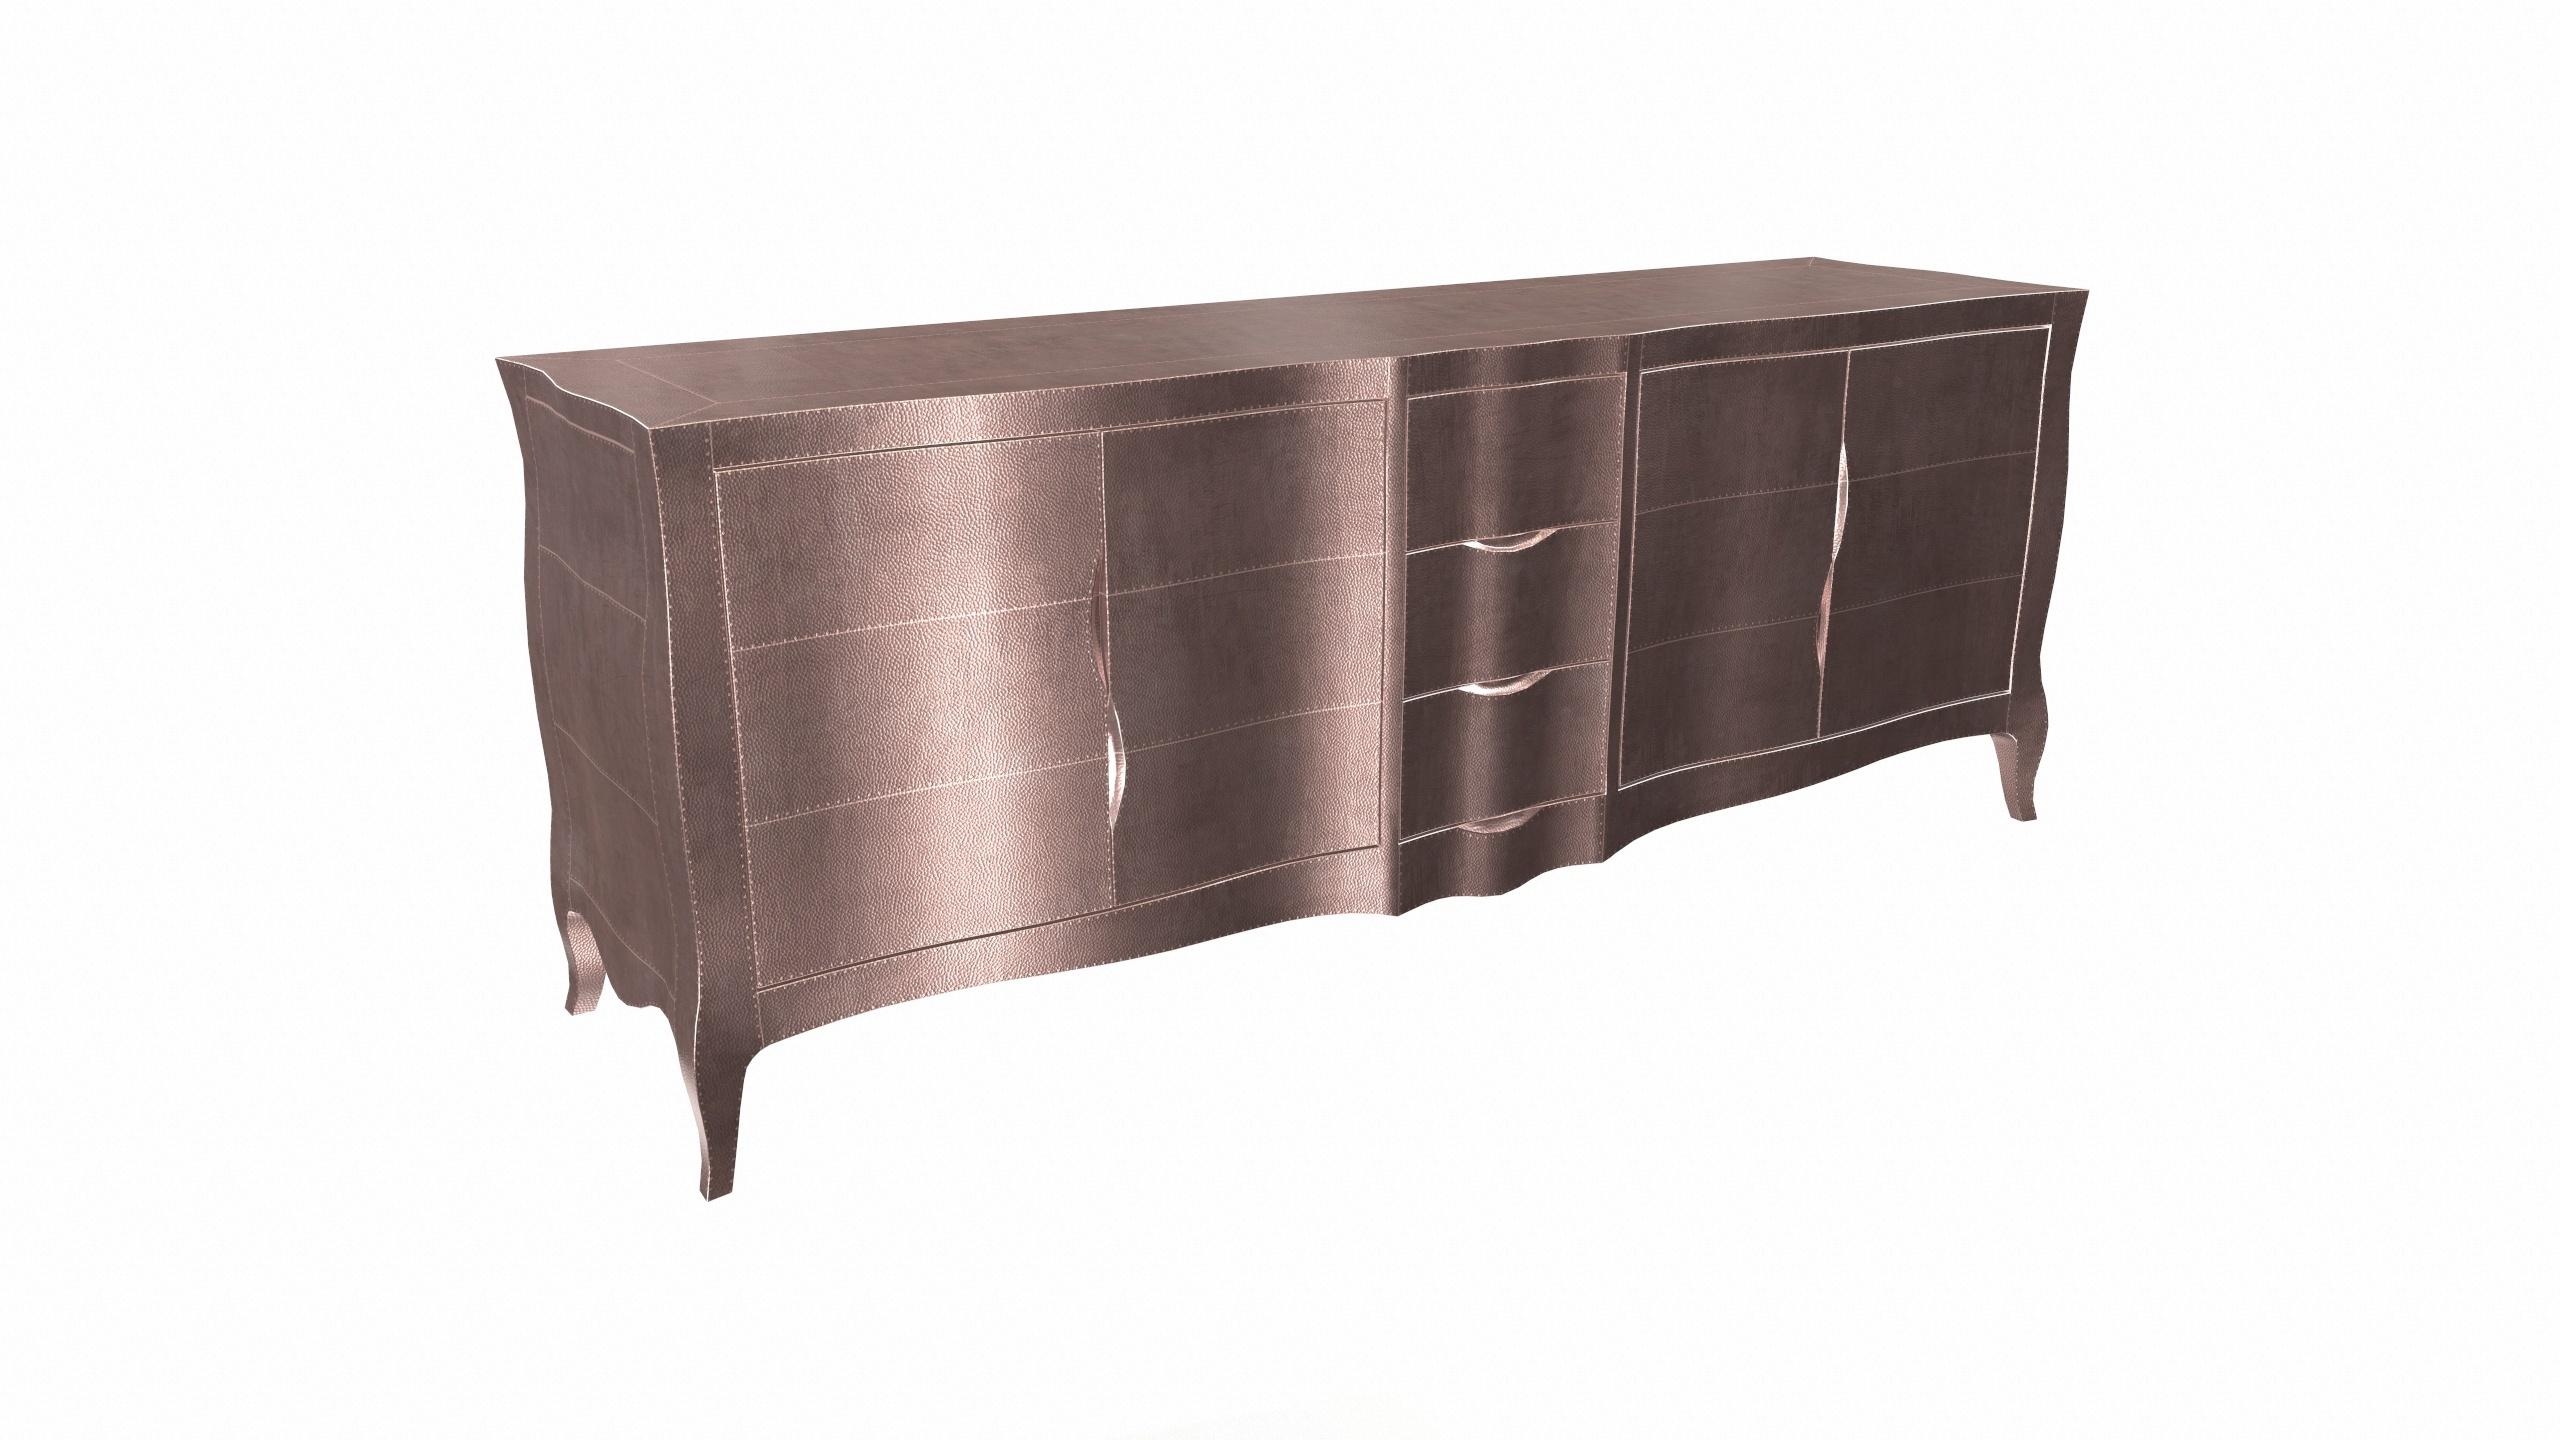 Contemporary Louise Credenza Art Deco Bookcases in Mid. Hammered Copper by Paul Mathieu For Sale